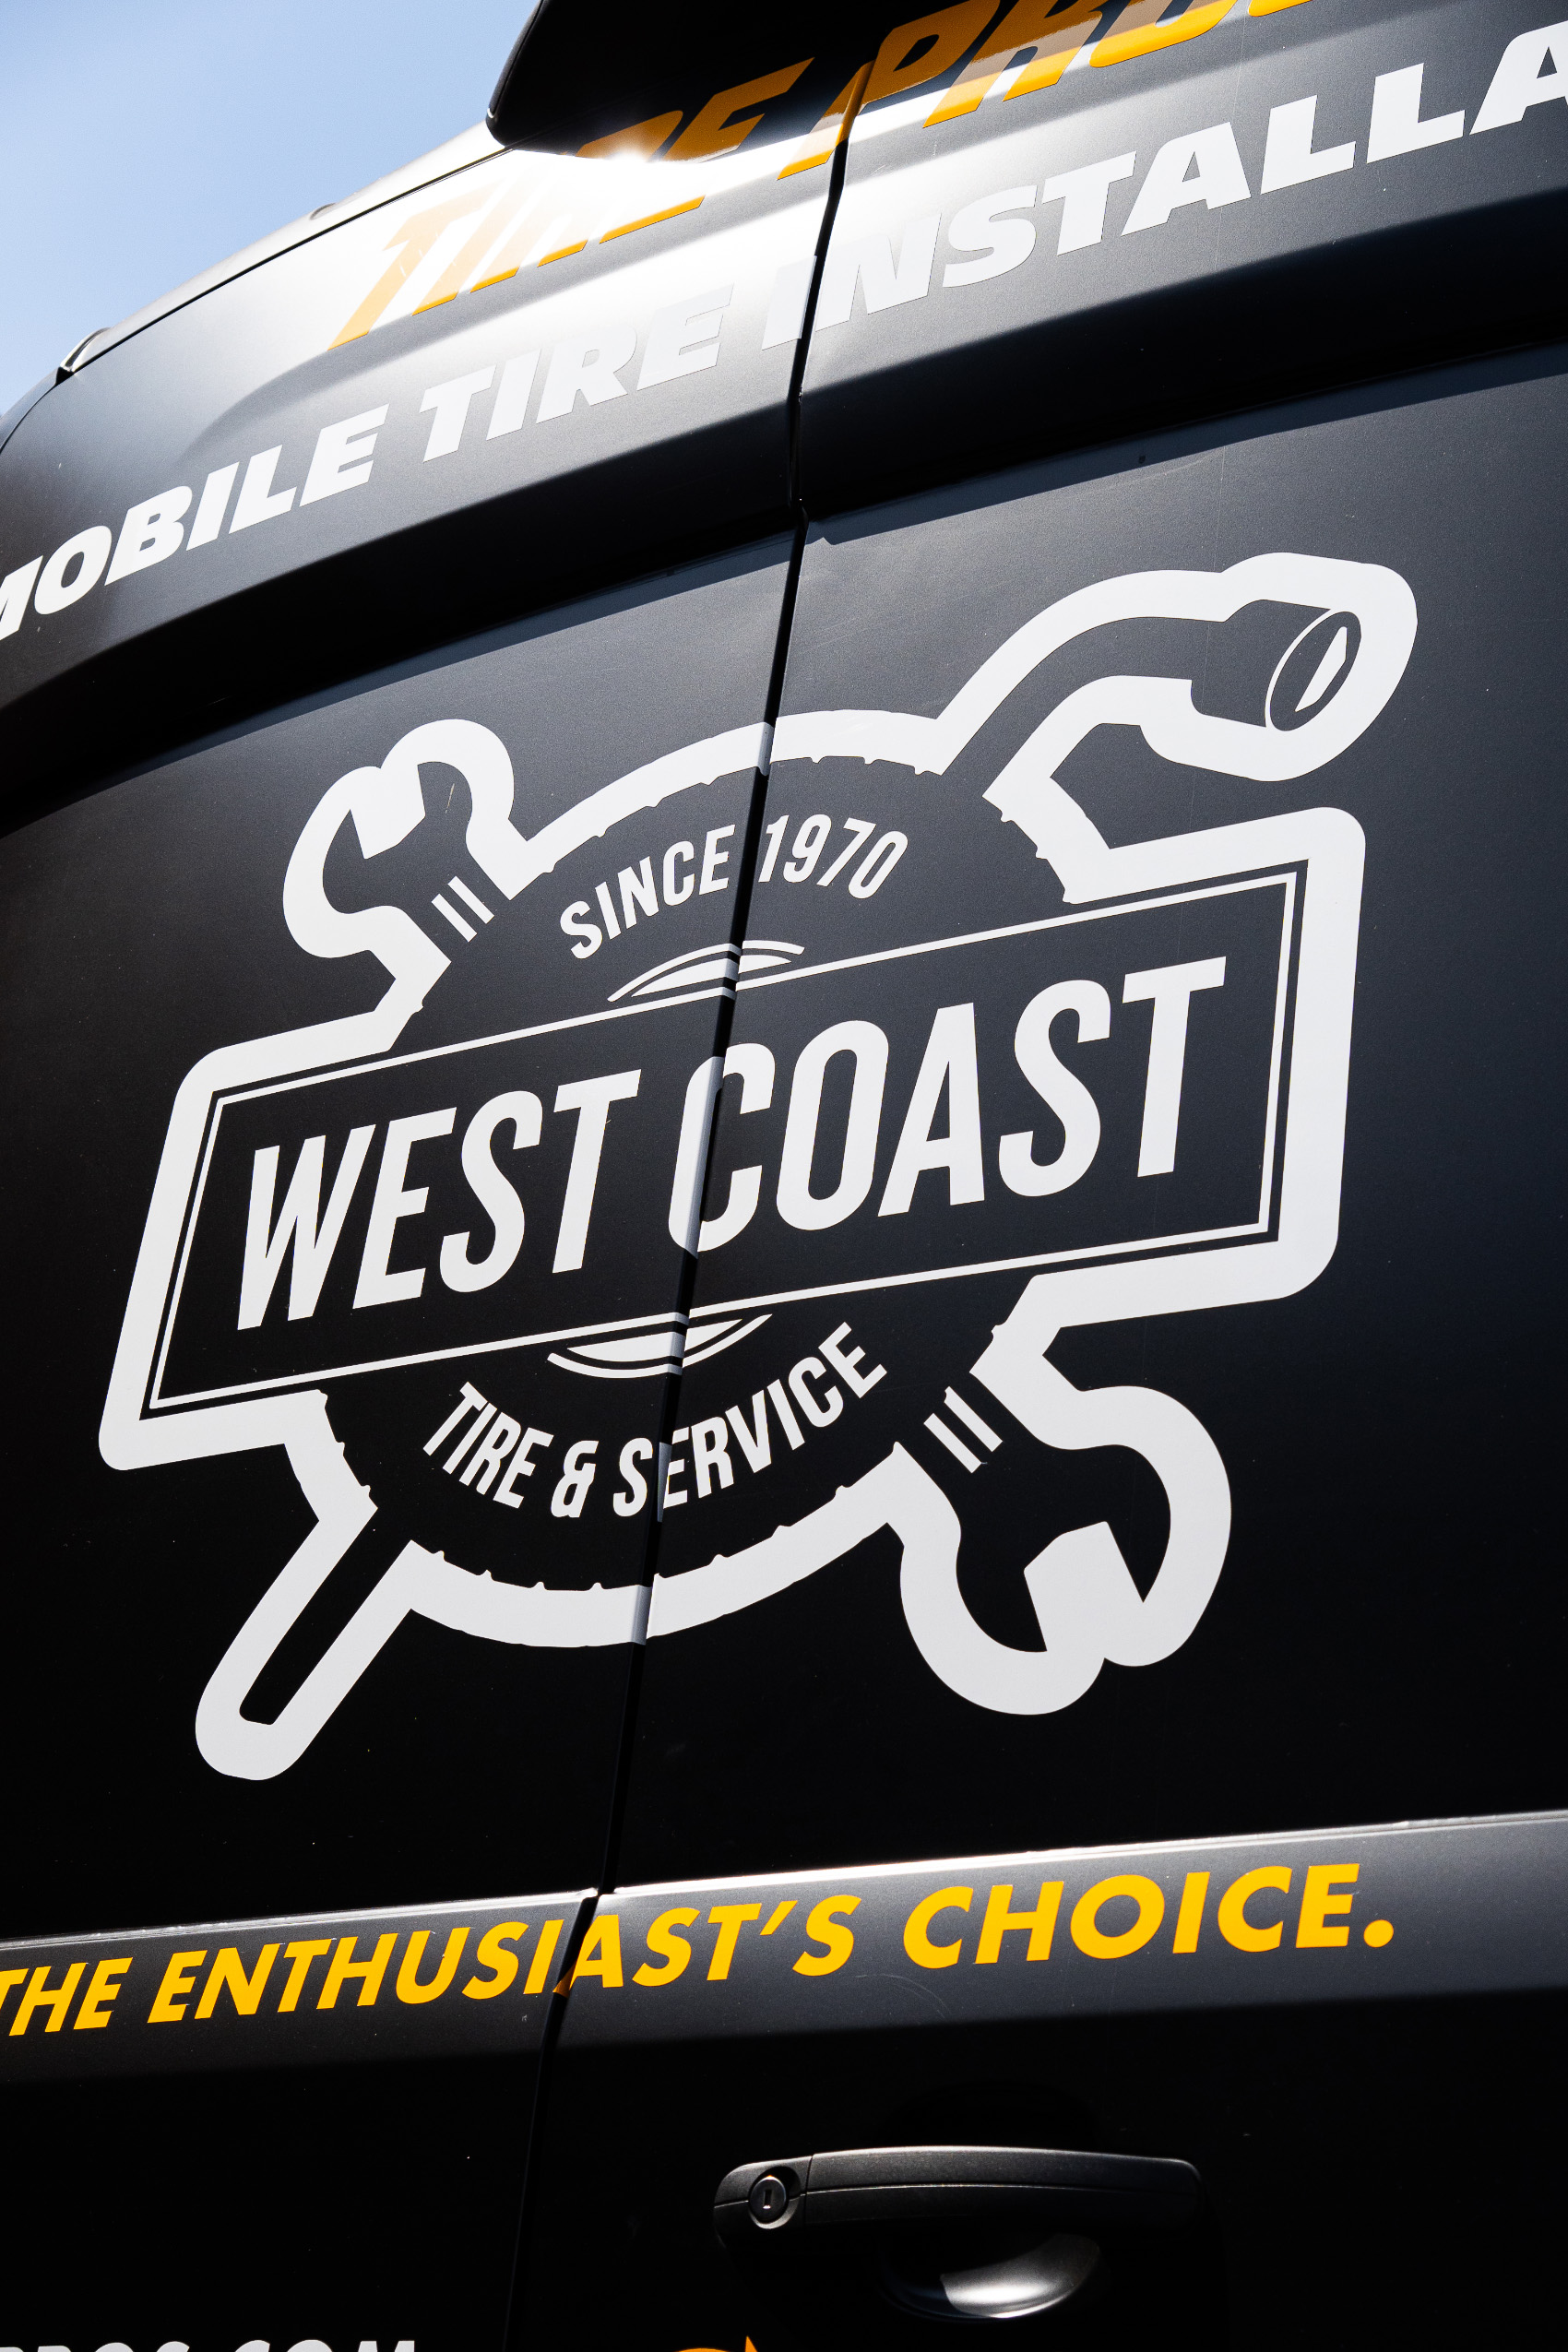 Our mobile service van equipped for on-the-go services